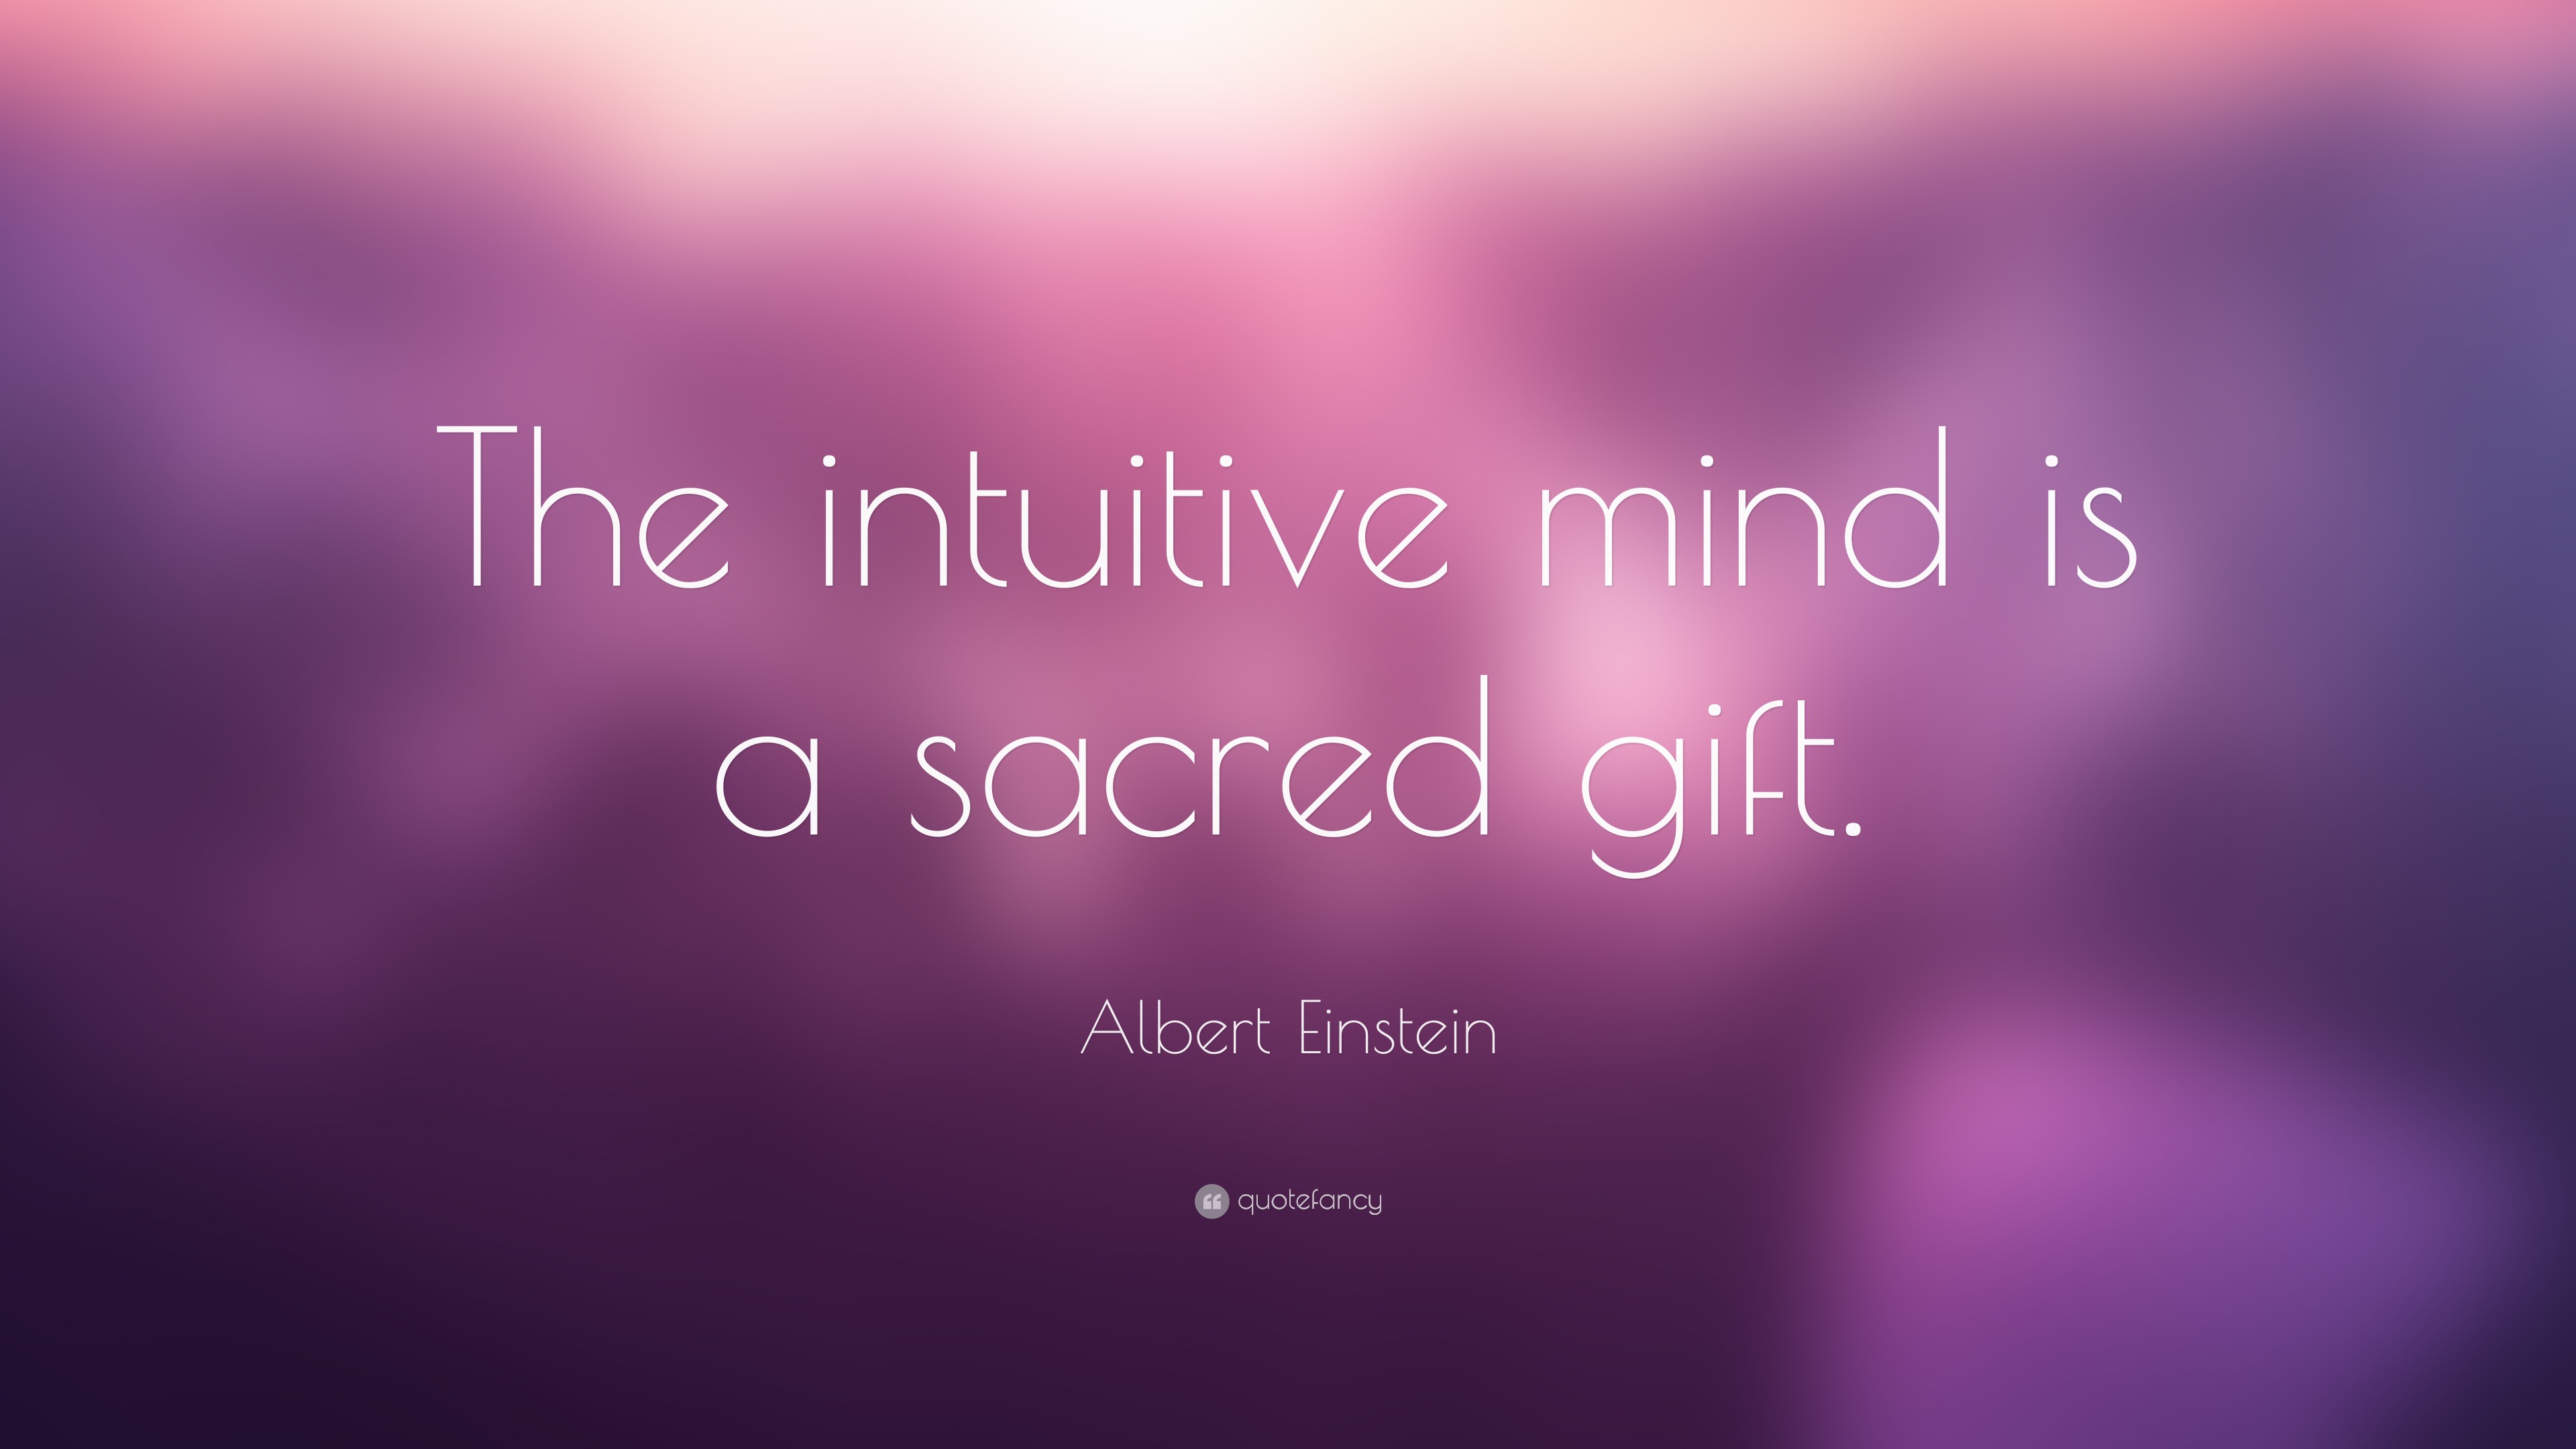 Albert Einstein Quote “The intuitive mind is a sacred gift.”